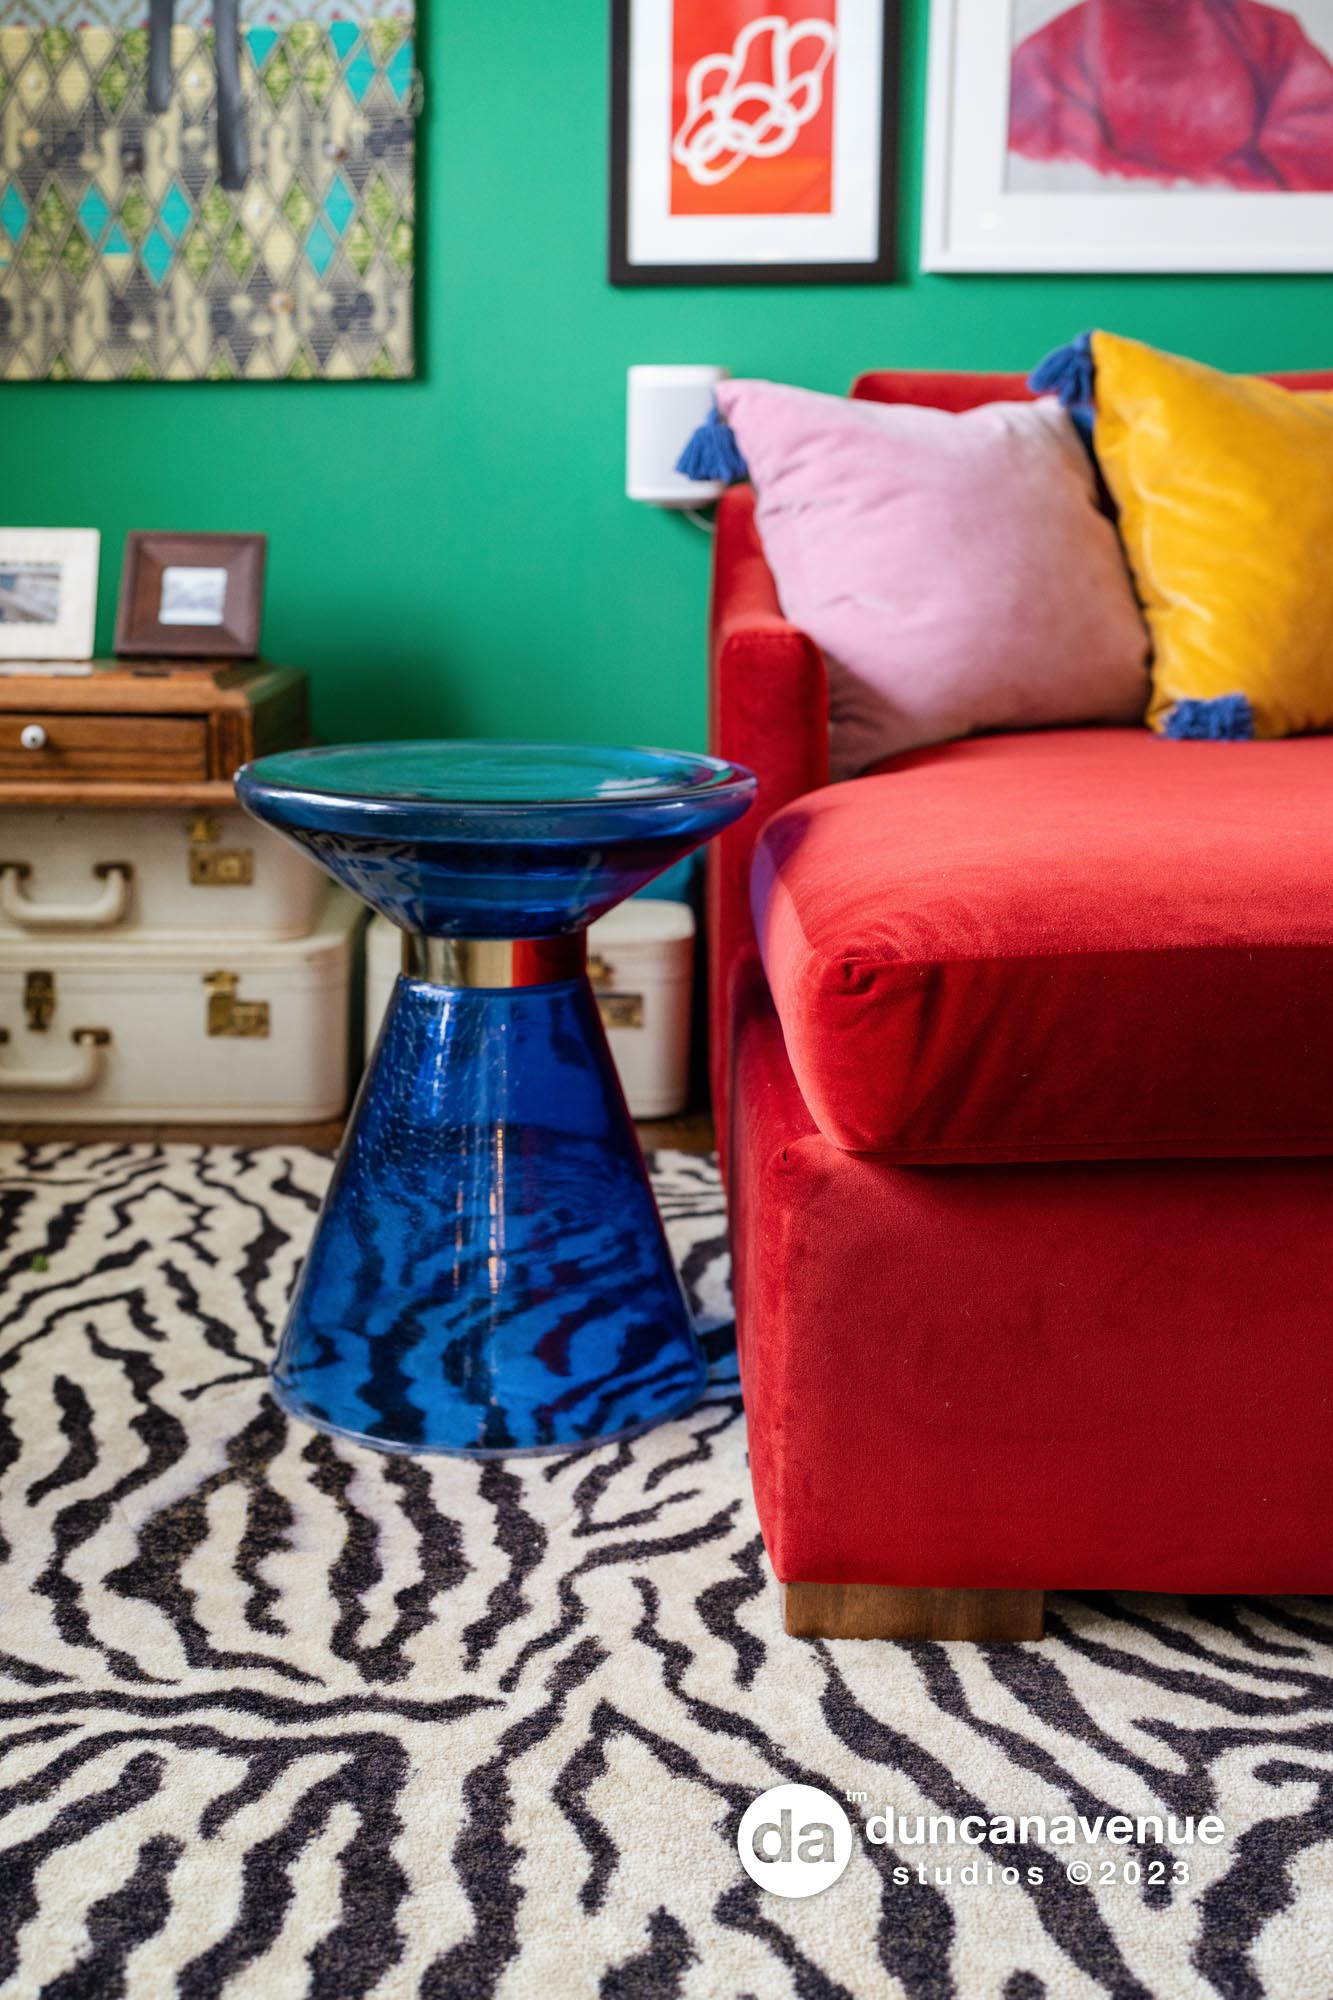 Experience the Bold and Vibrant Maximalist Style in Long Island's Latest Interior Design Project - A Photoshoot by Duncan Avenue Studios for Alluvion Media + Hudson Valley Style Magazine